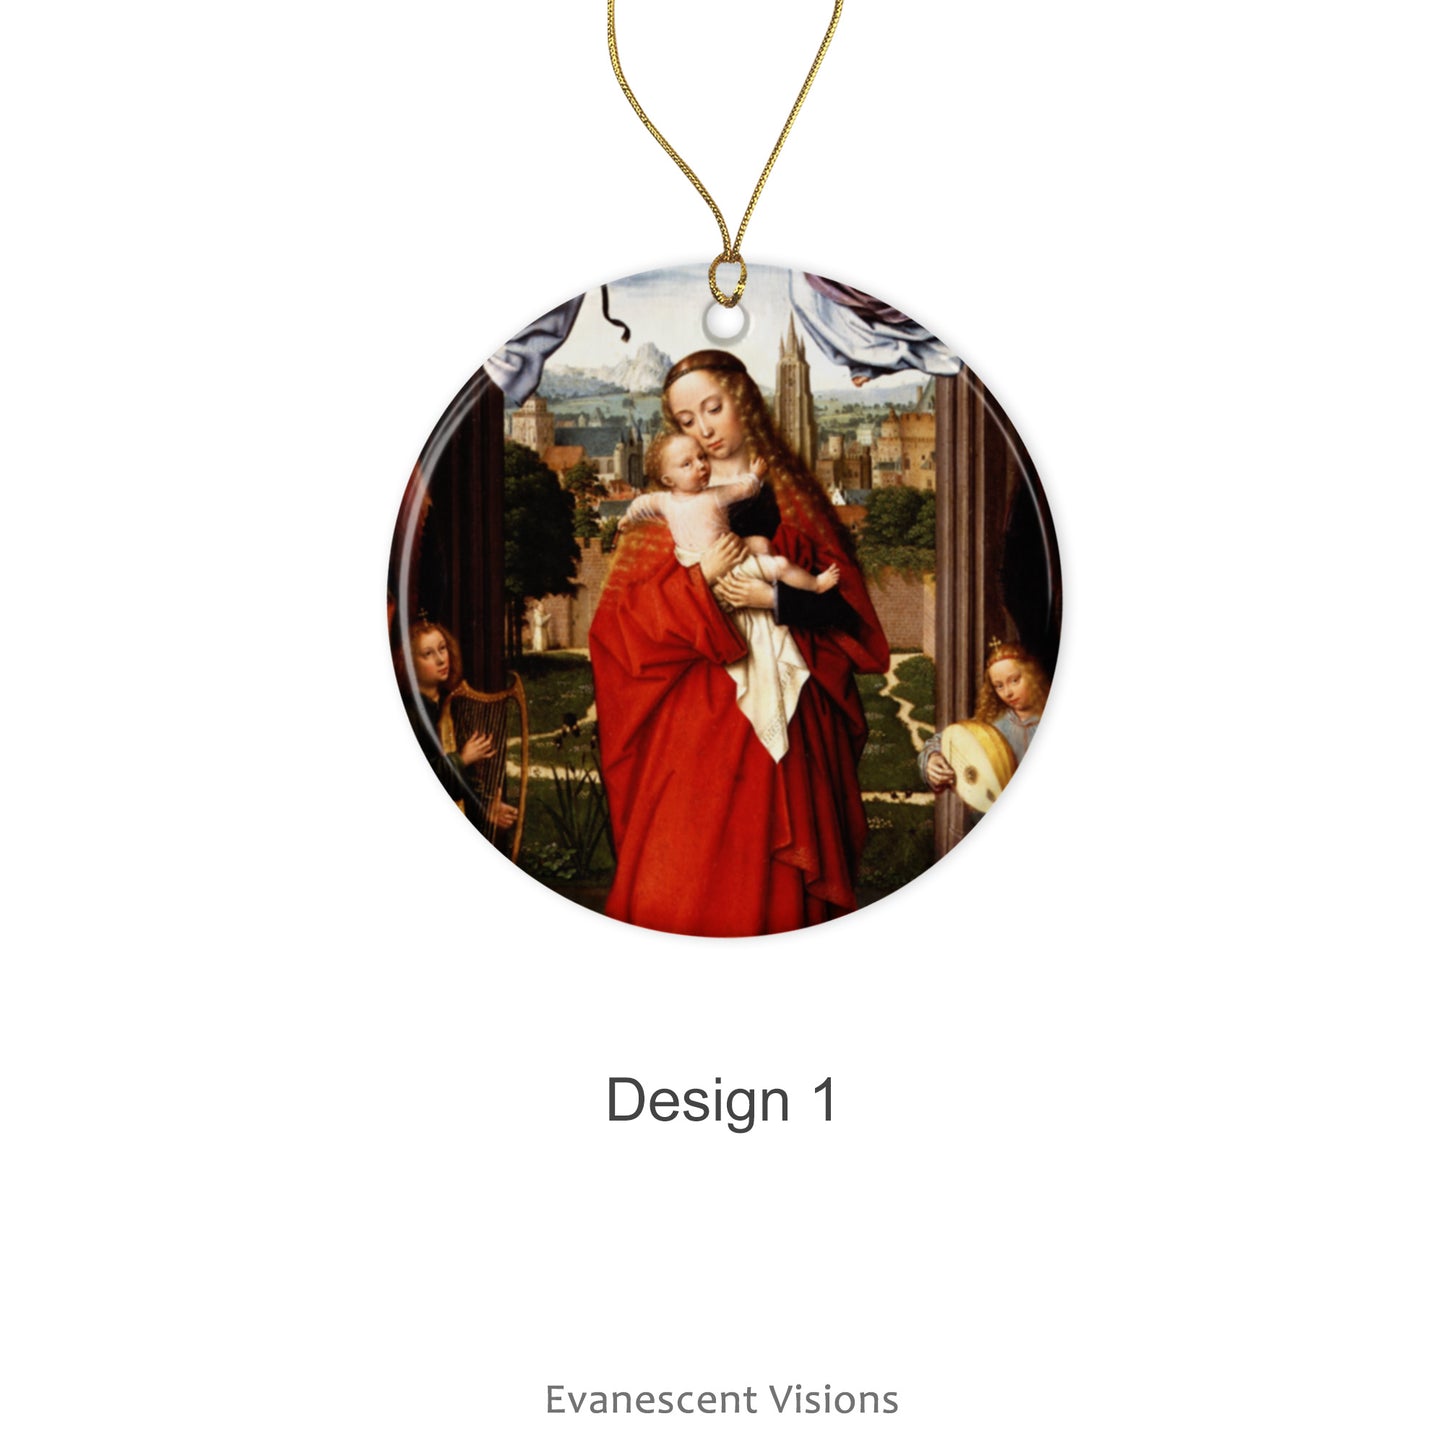 Ceramic Christmas ornament with detail of the painting 'The Virgin and Child with Four Angels' by Gerard David